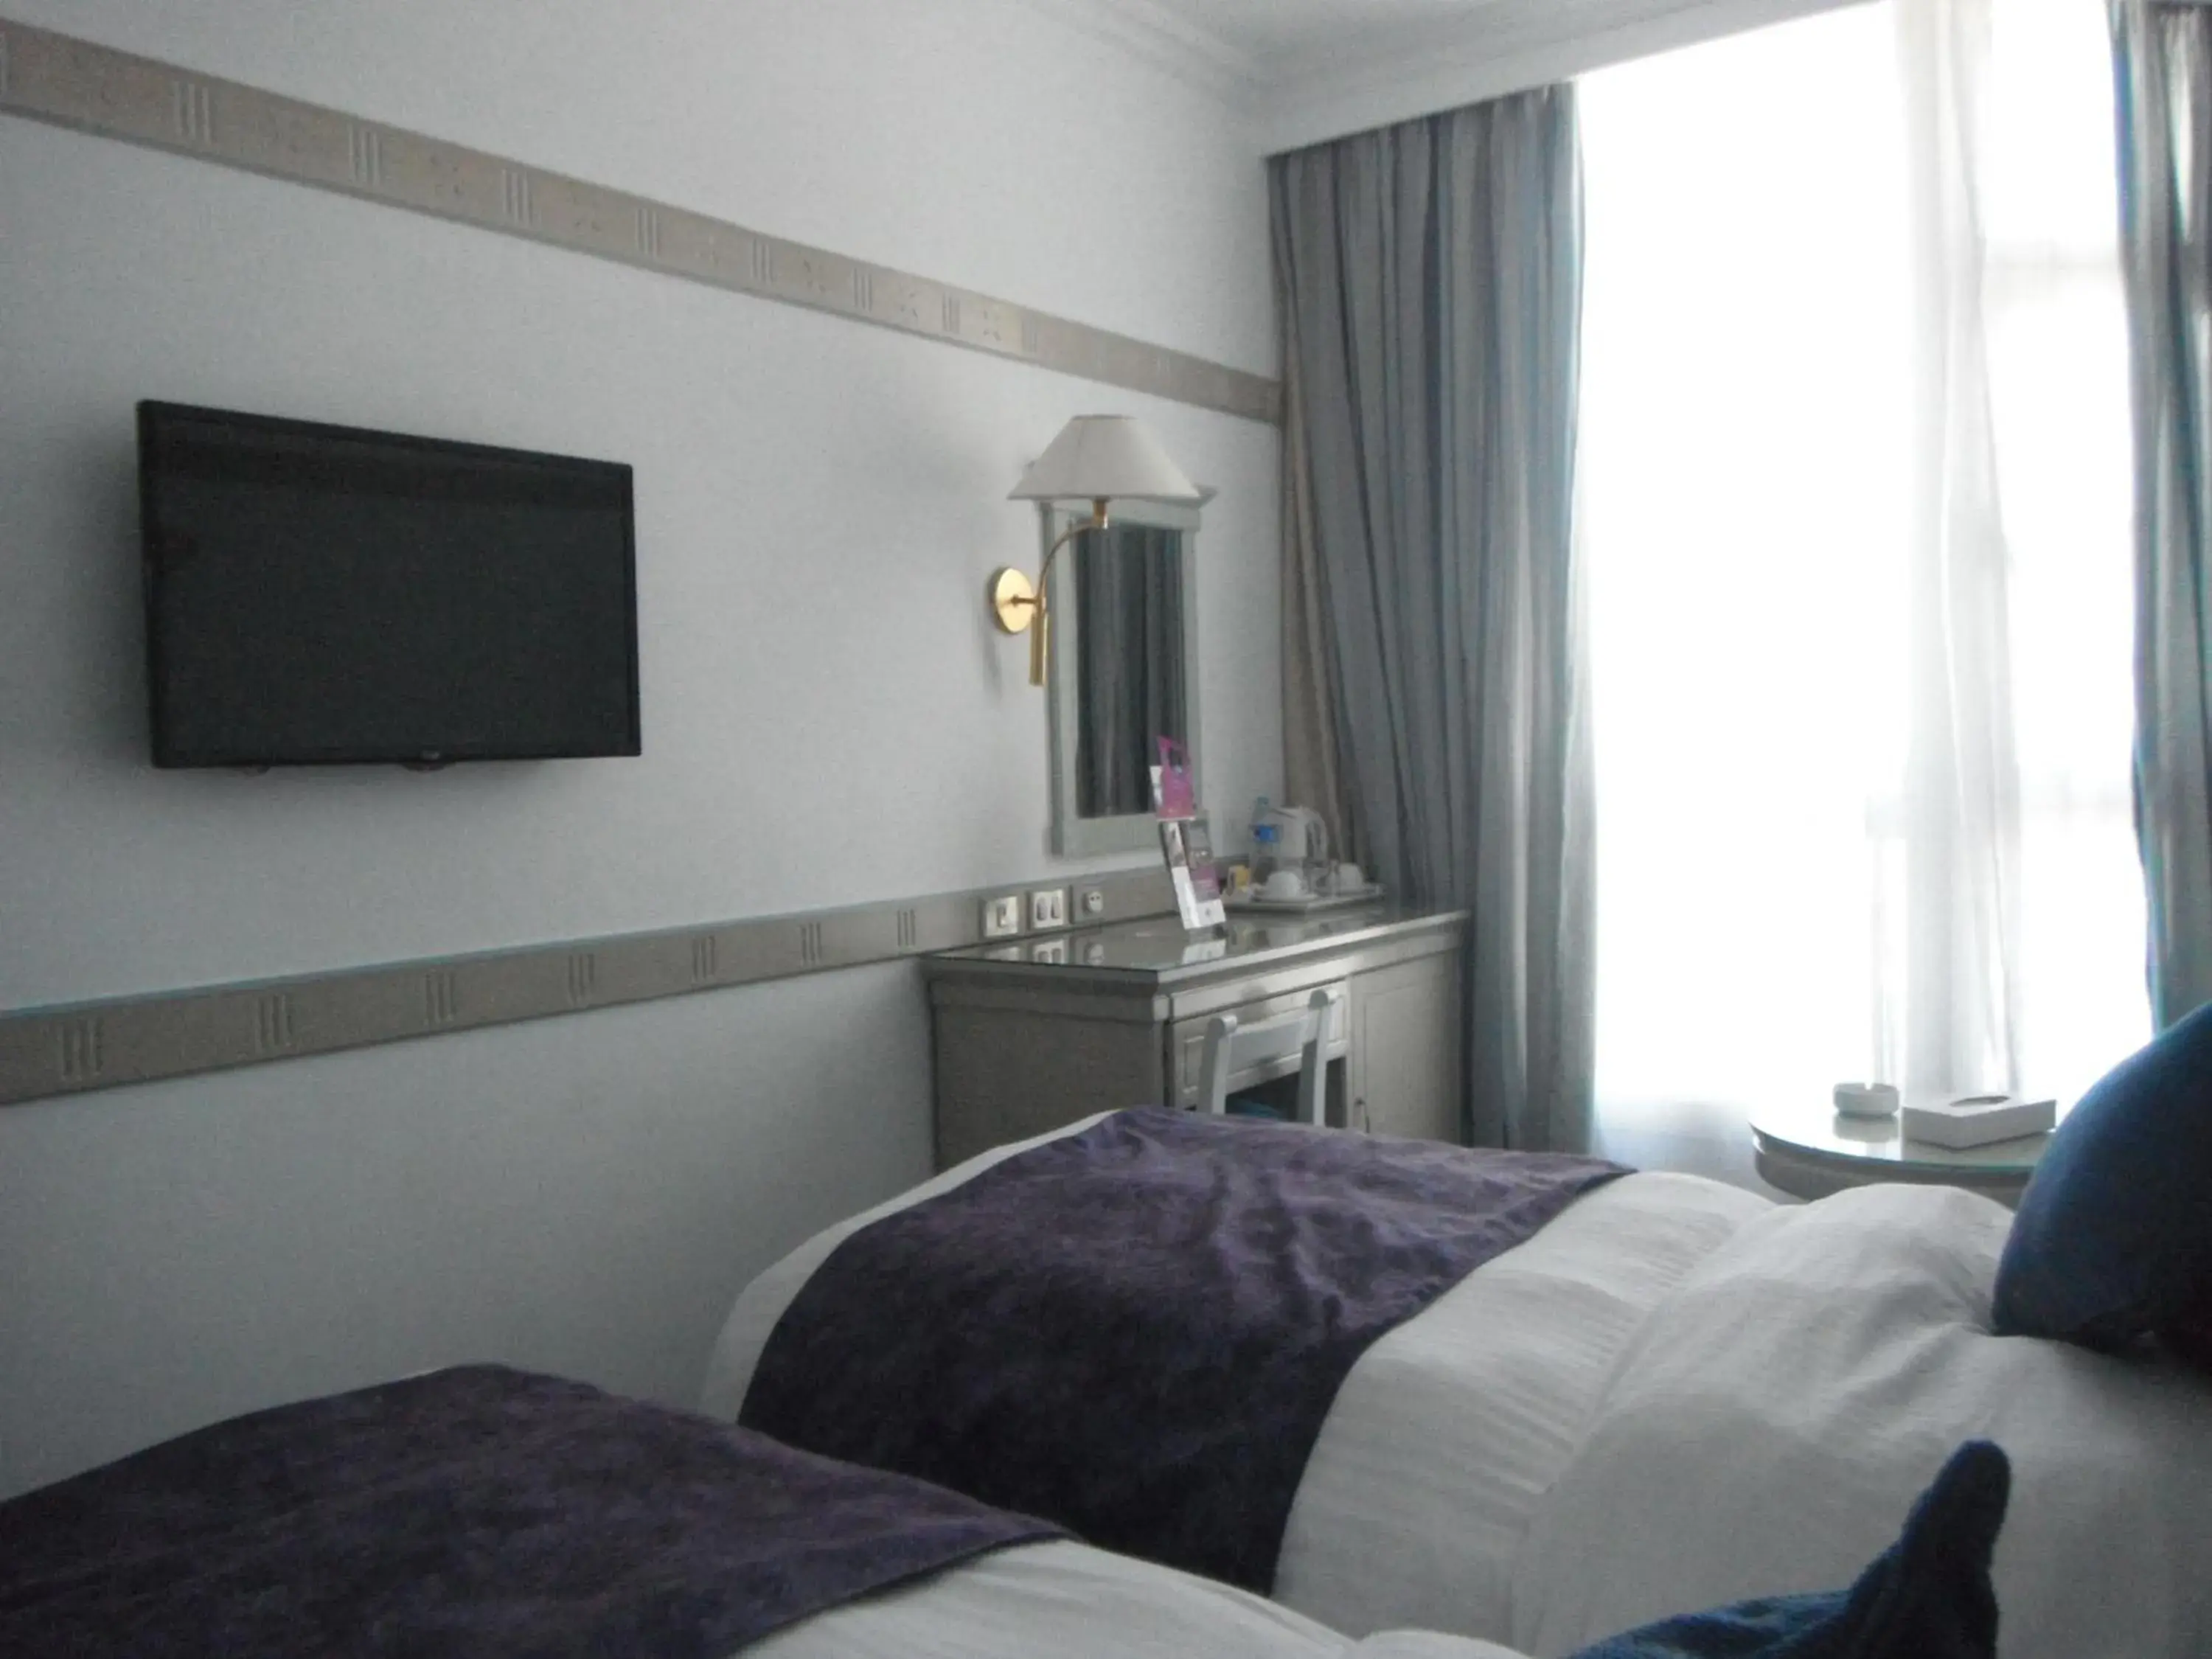 TV and multimedia, Bed in Romance Alexandria Hotel